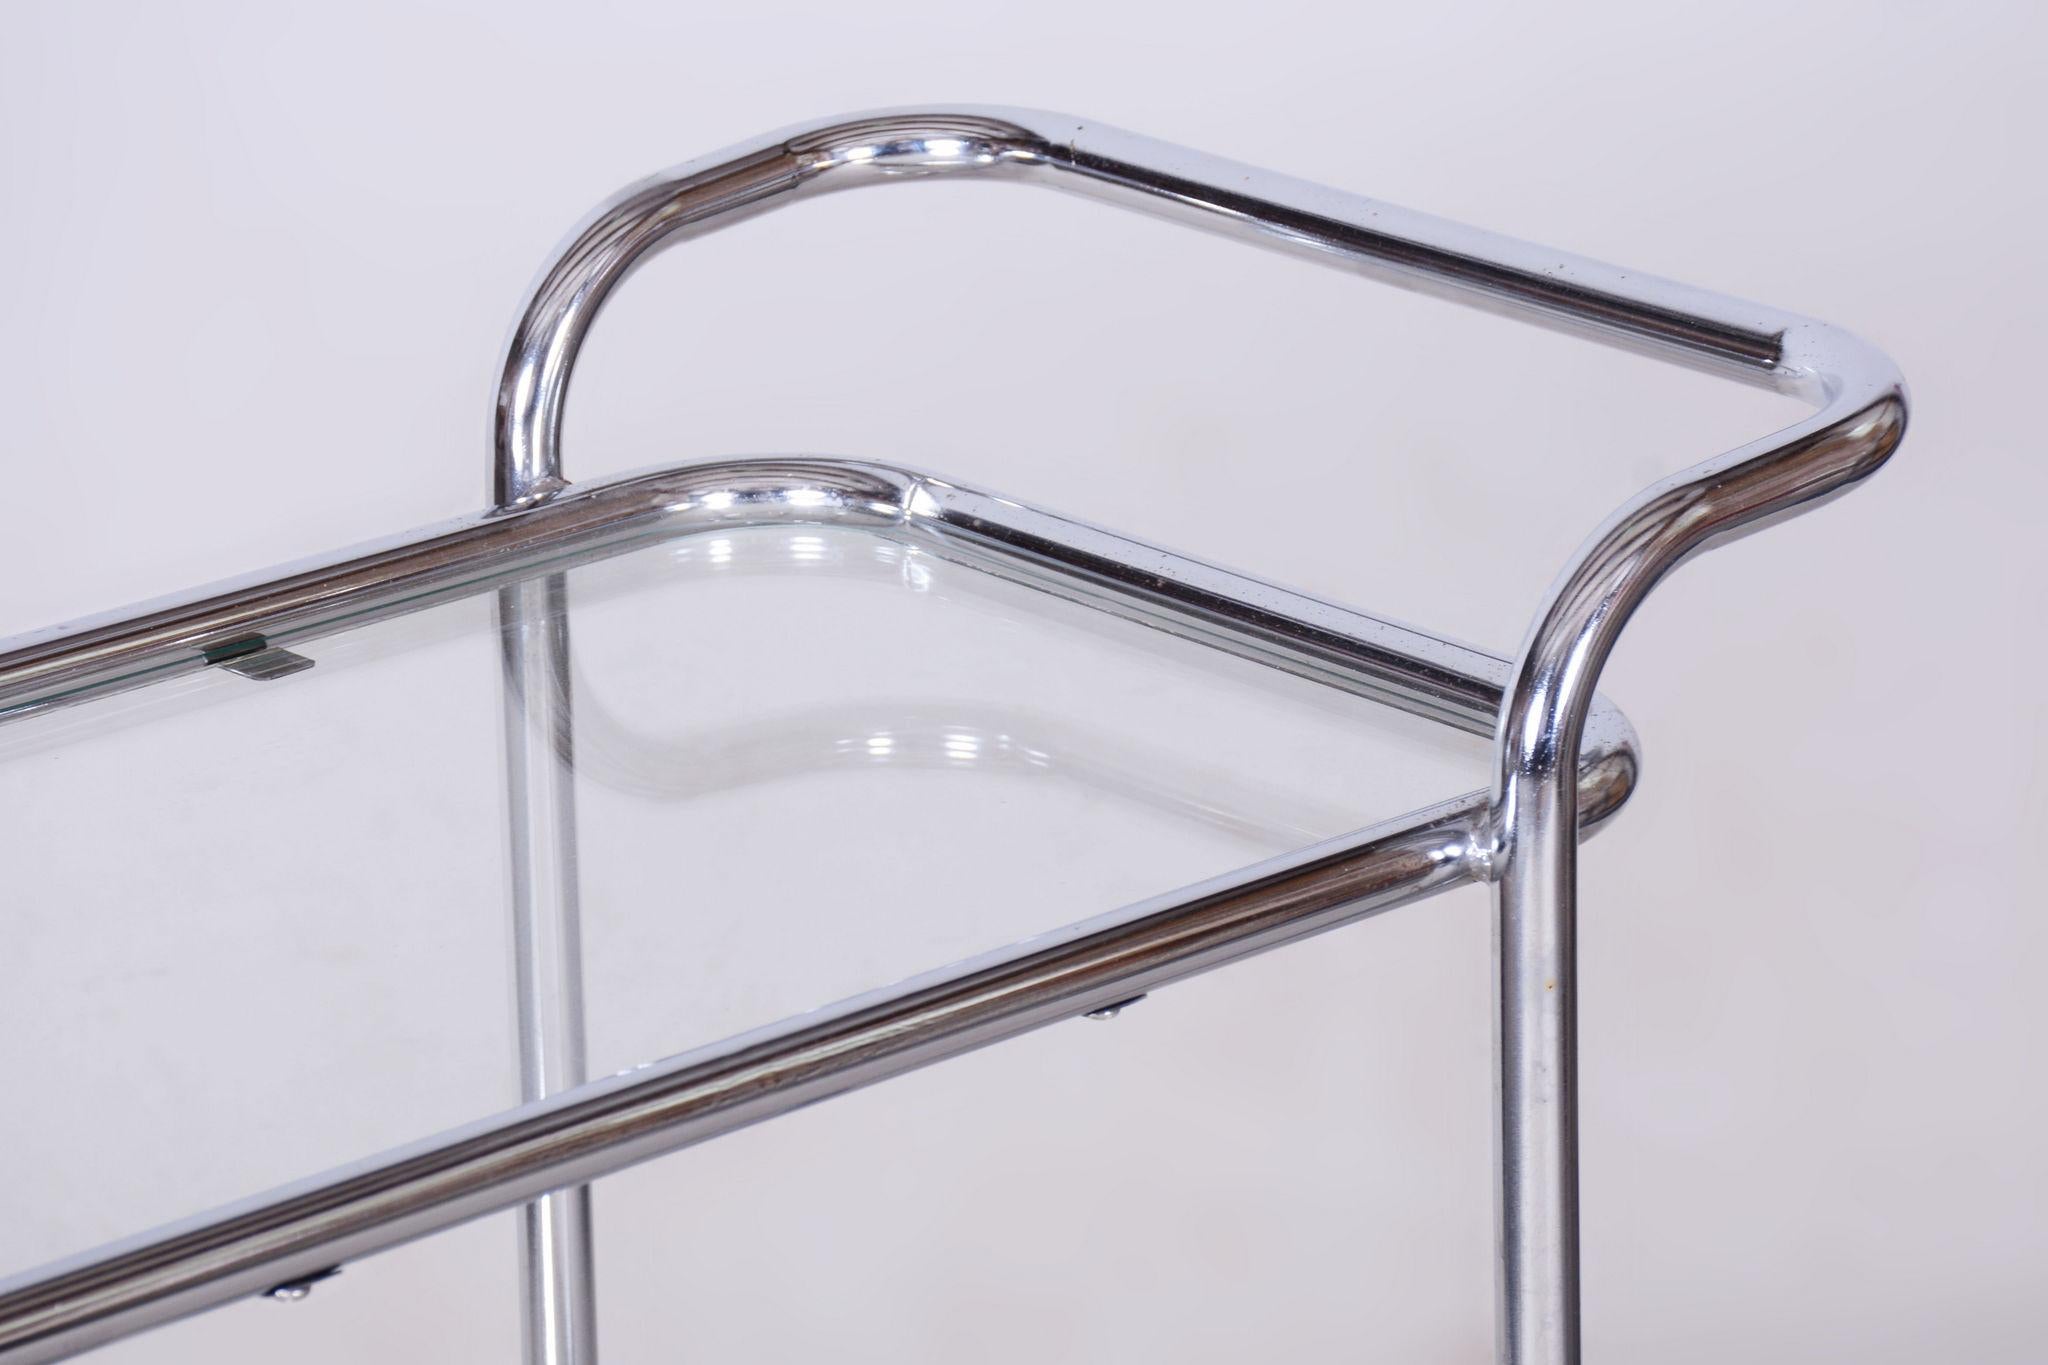 Mid-20th Century Original Bauhaus Trolley, Chrome-Plated Steel, Glass, Germany, 1940s For Sale